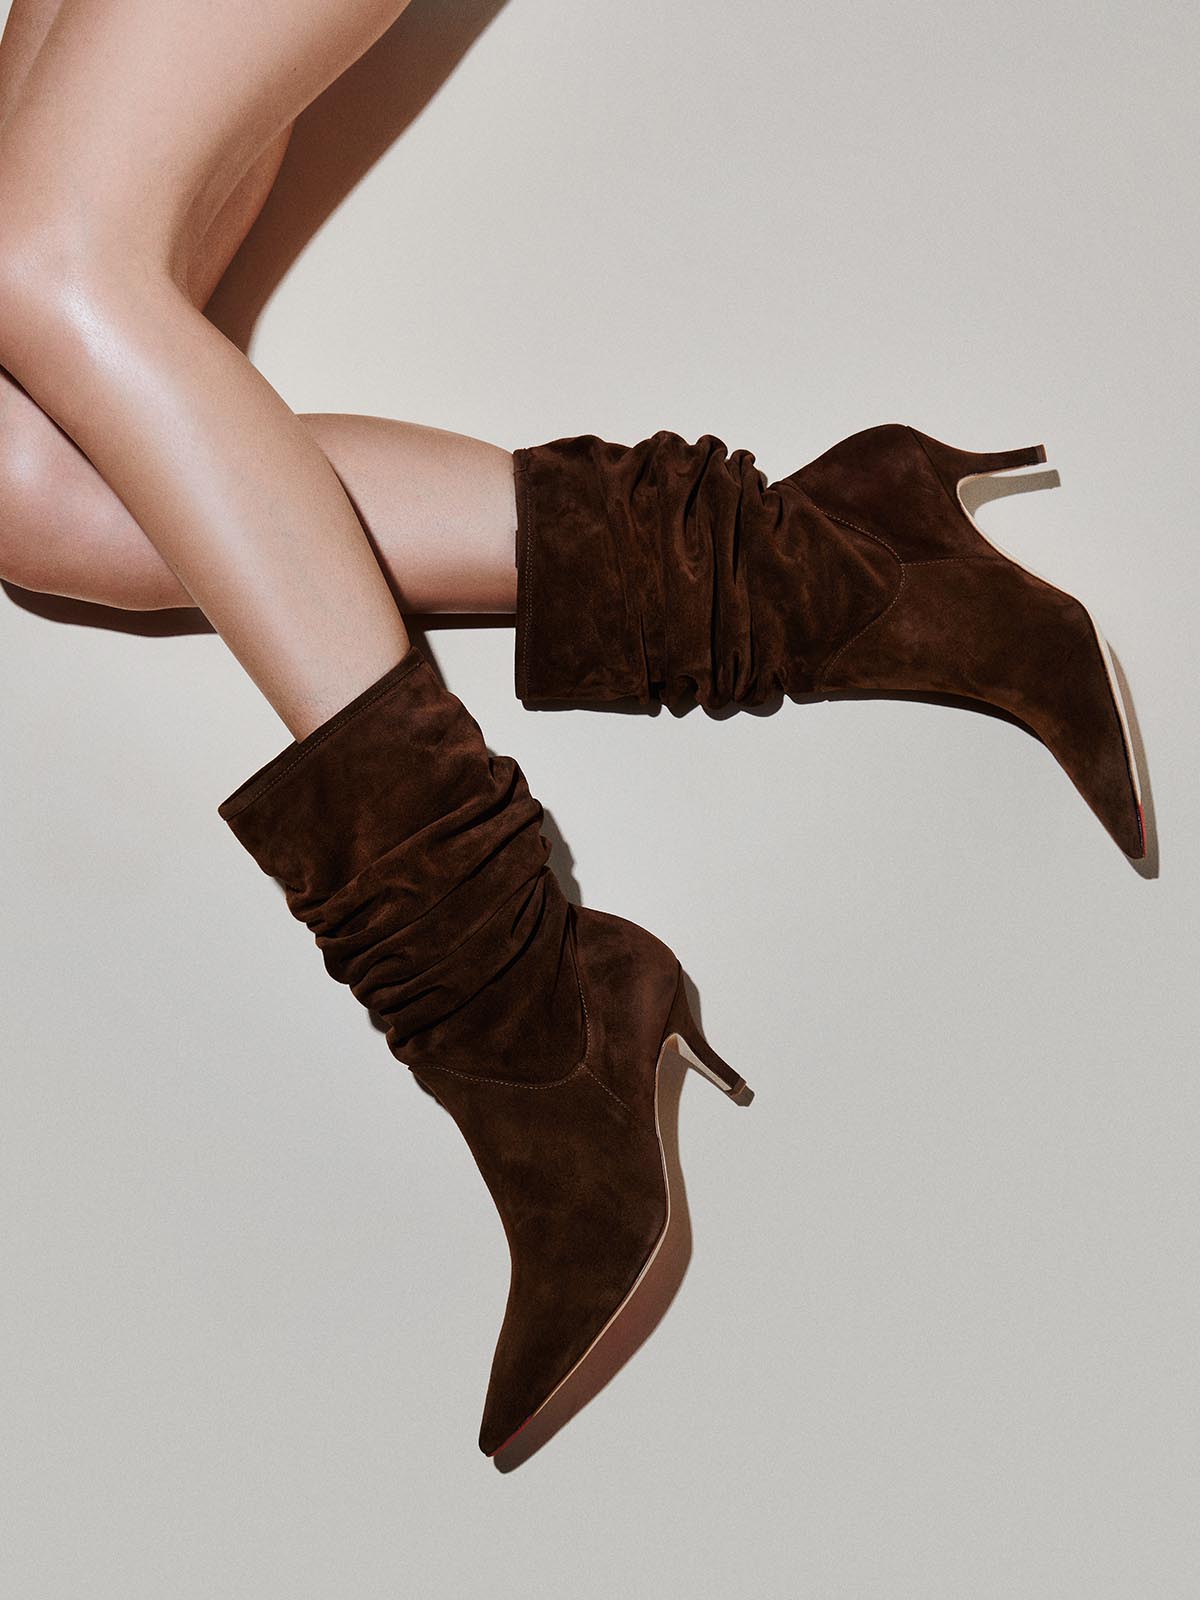 Vivian Designer Italian Suede Leather Slouchy Pump Heeled Boots Chestnut Brown Made in Italy by Mavette